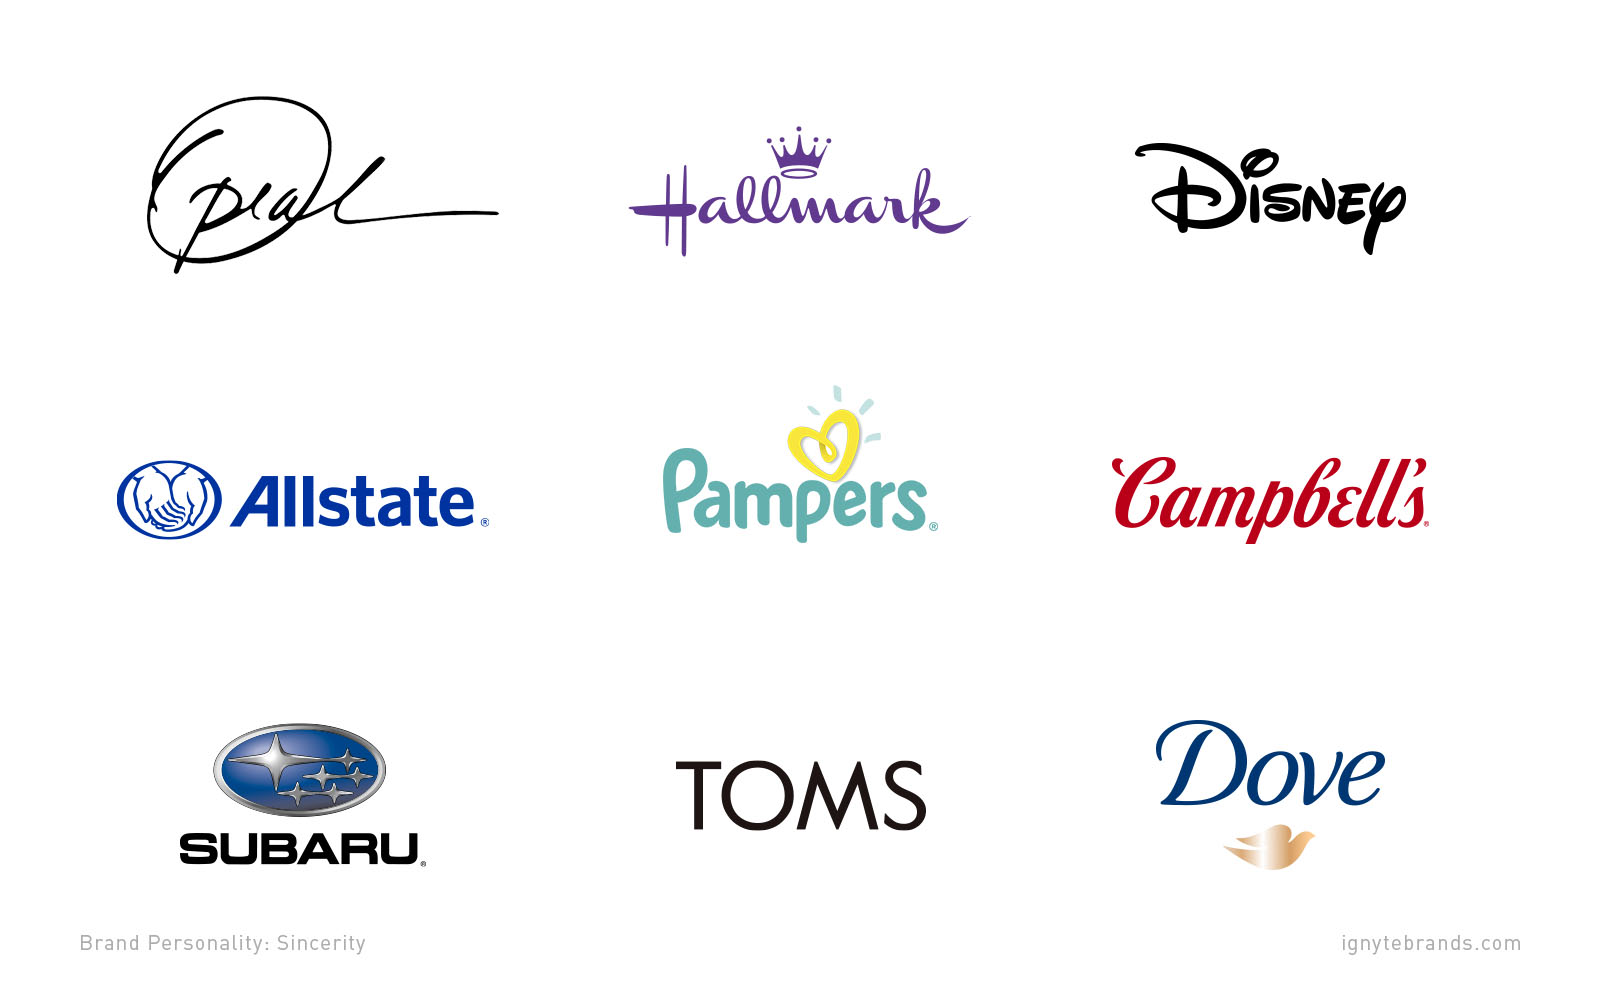 9 logos of brands with sincere brand personalities, including Oprah, Hallmark, Disney, Allstate, Pampers, Campbell's, Subaru, TOMS, and Dove